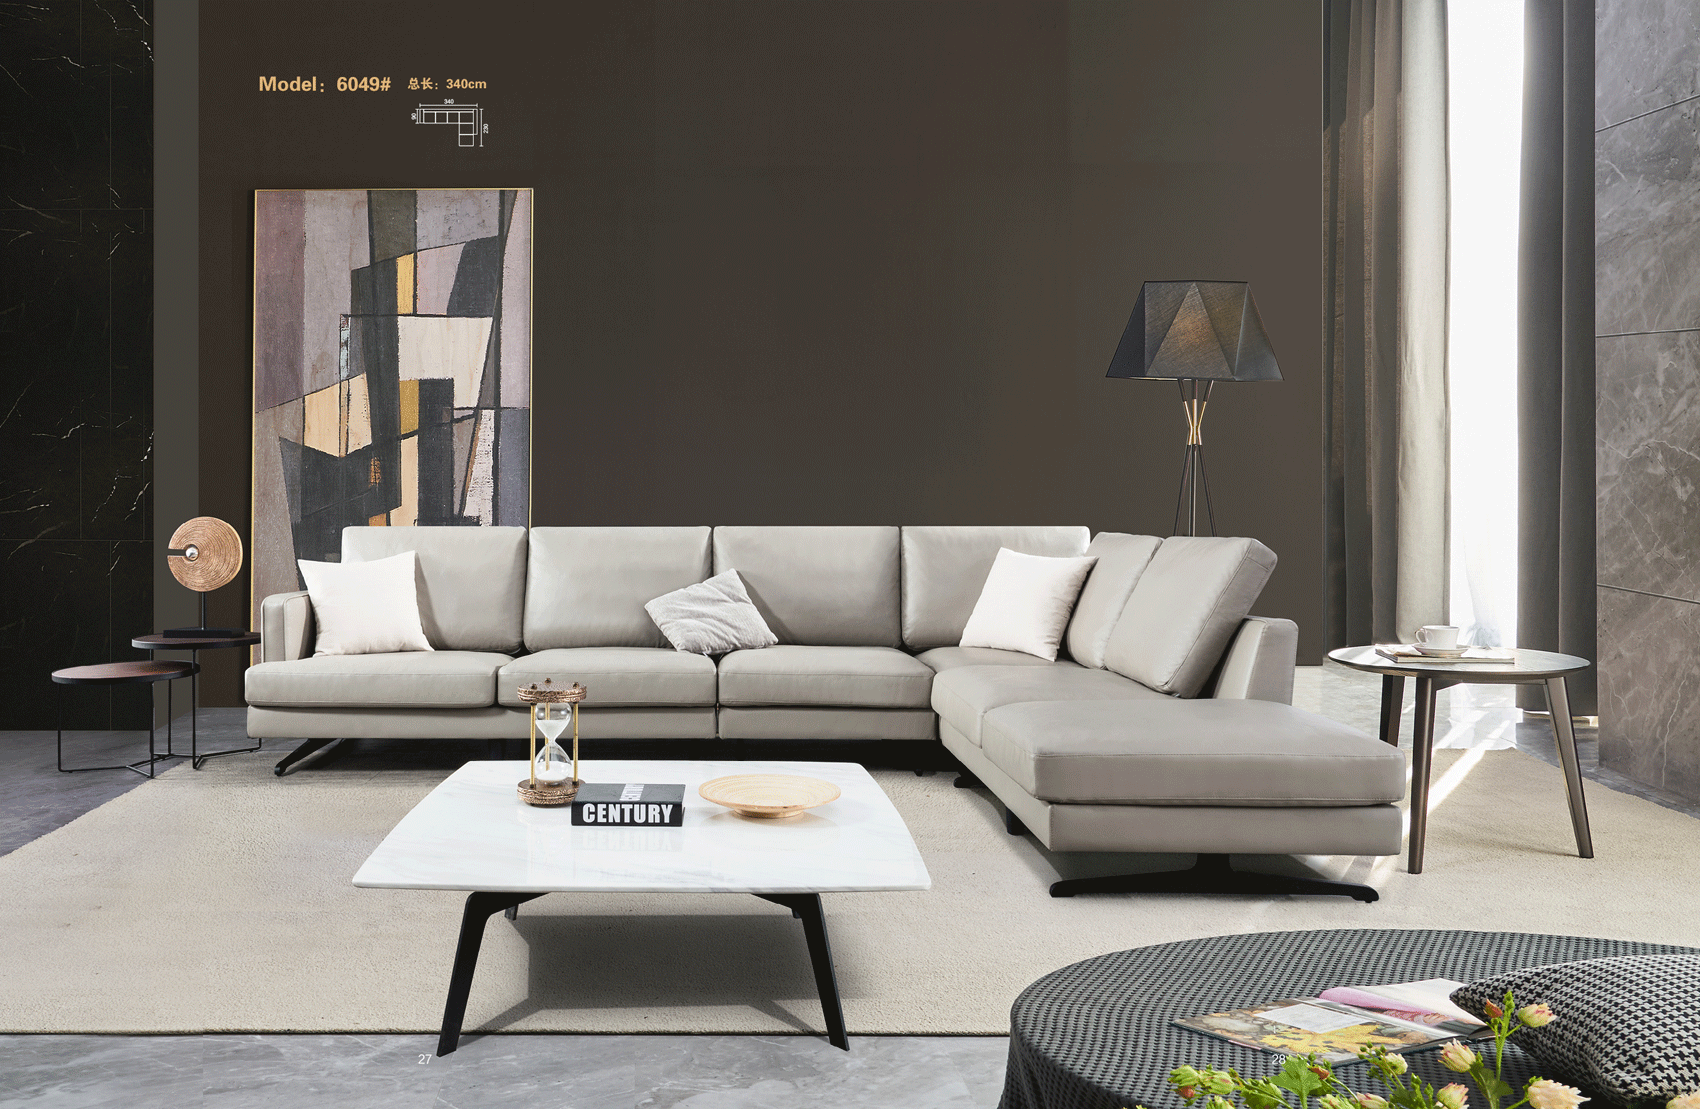 Brands Formerin Classic Living Room, Italy 6049 Sectional